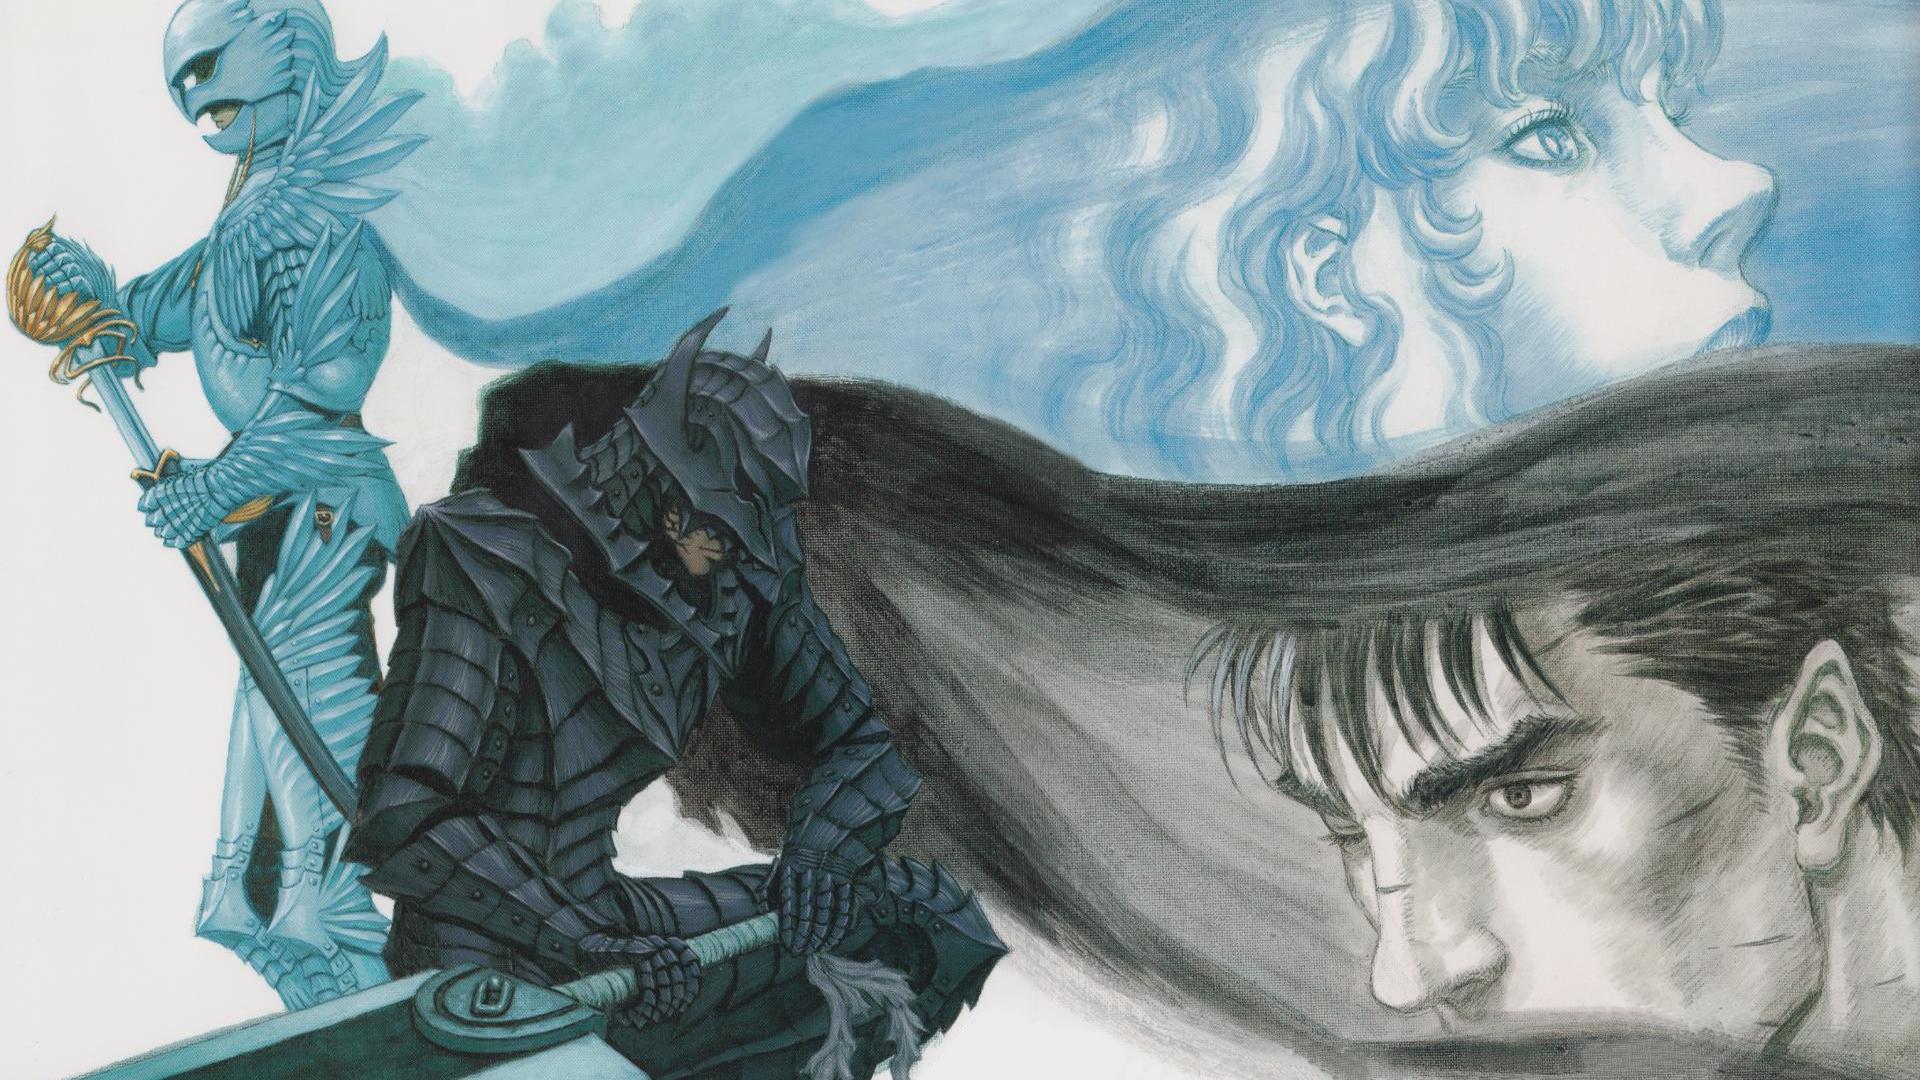  51348_berserk_guts_and_griffith